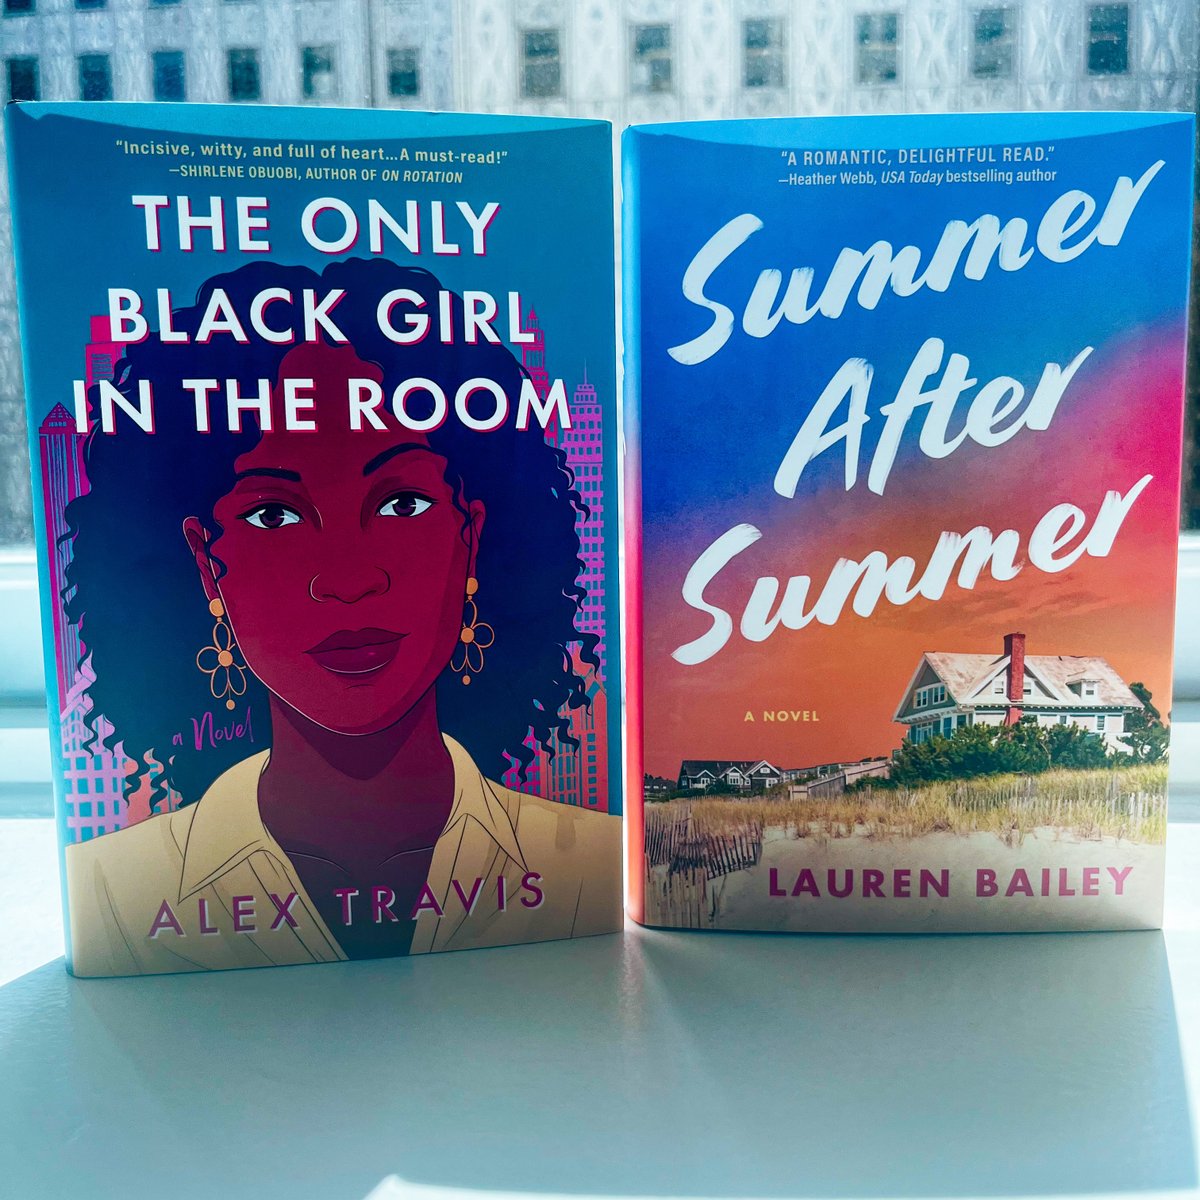 🤩2 stunning new debuts out today! 🥳Happy #pubday to our May authors!

✒️THE ONLY BLACK GIRL IN THE ROOM by @AlexAwritergirl
☀️SUMMER AFTER SUMMER by @LBaileyWrites